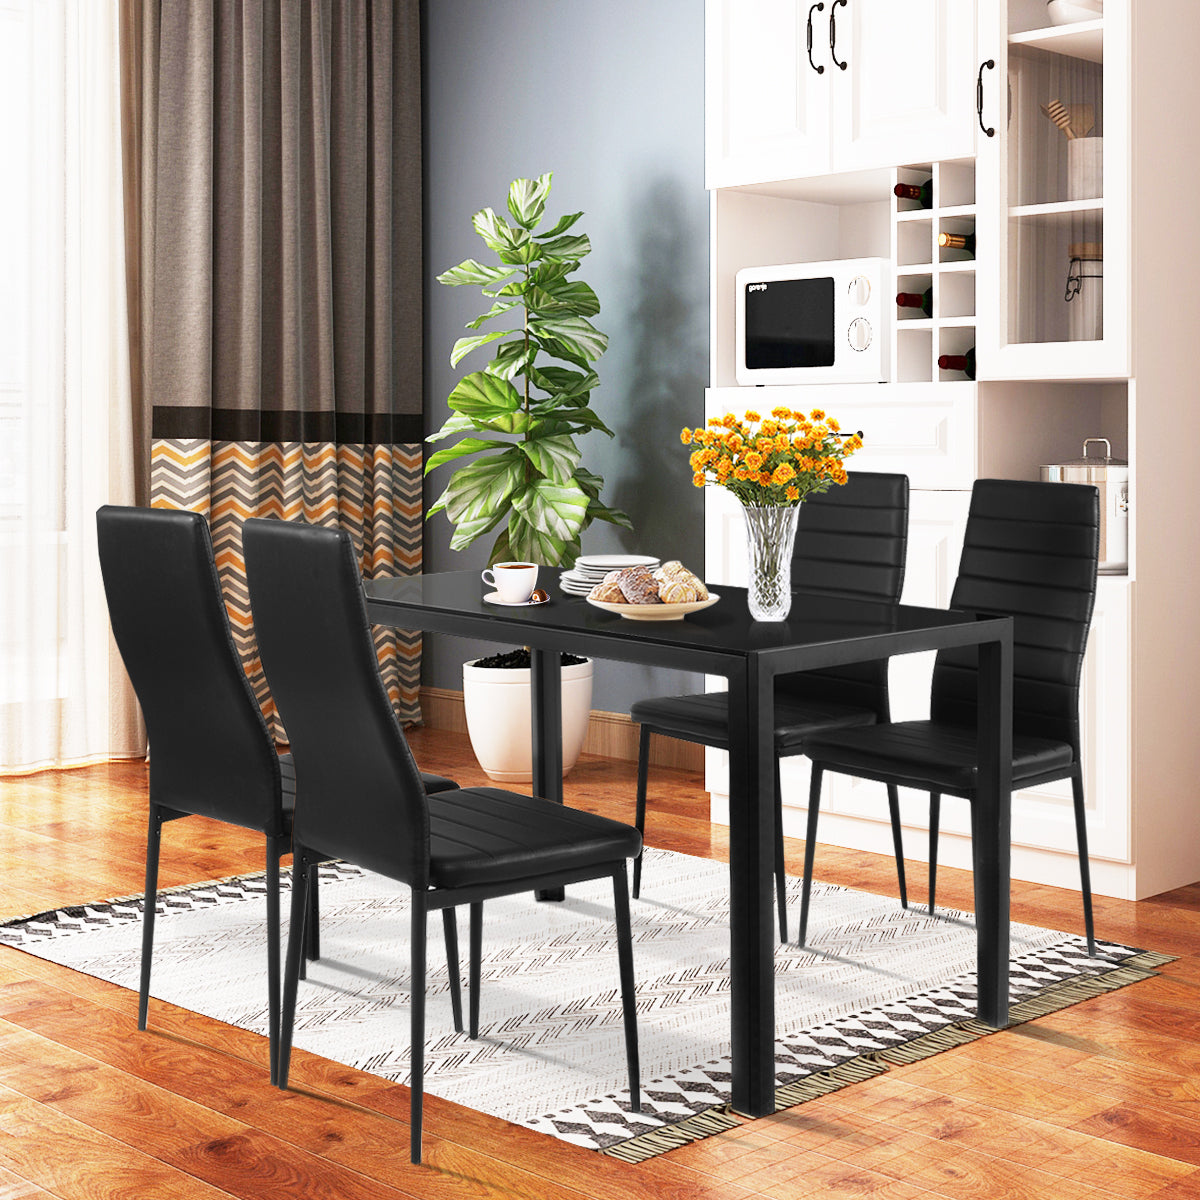 5 Piece Kitchen Dining Table Set with Glass Table Top Leather Padded 4 Chairs (Black) - Giantexus